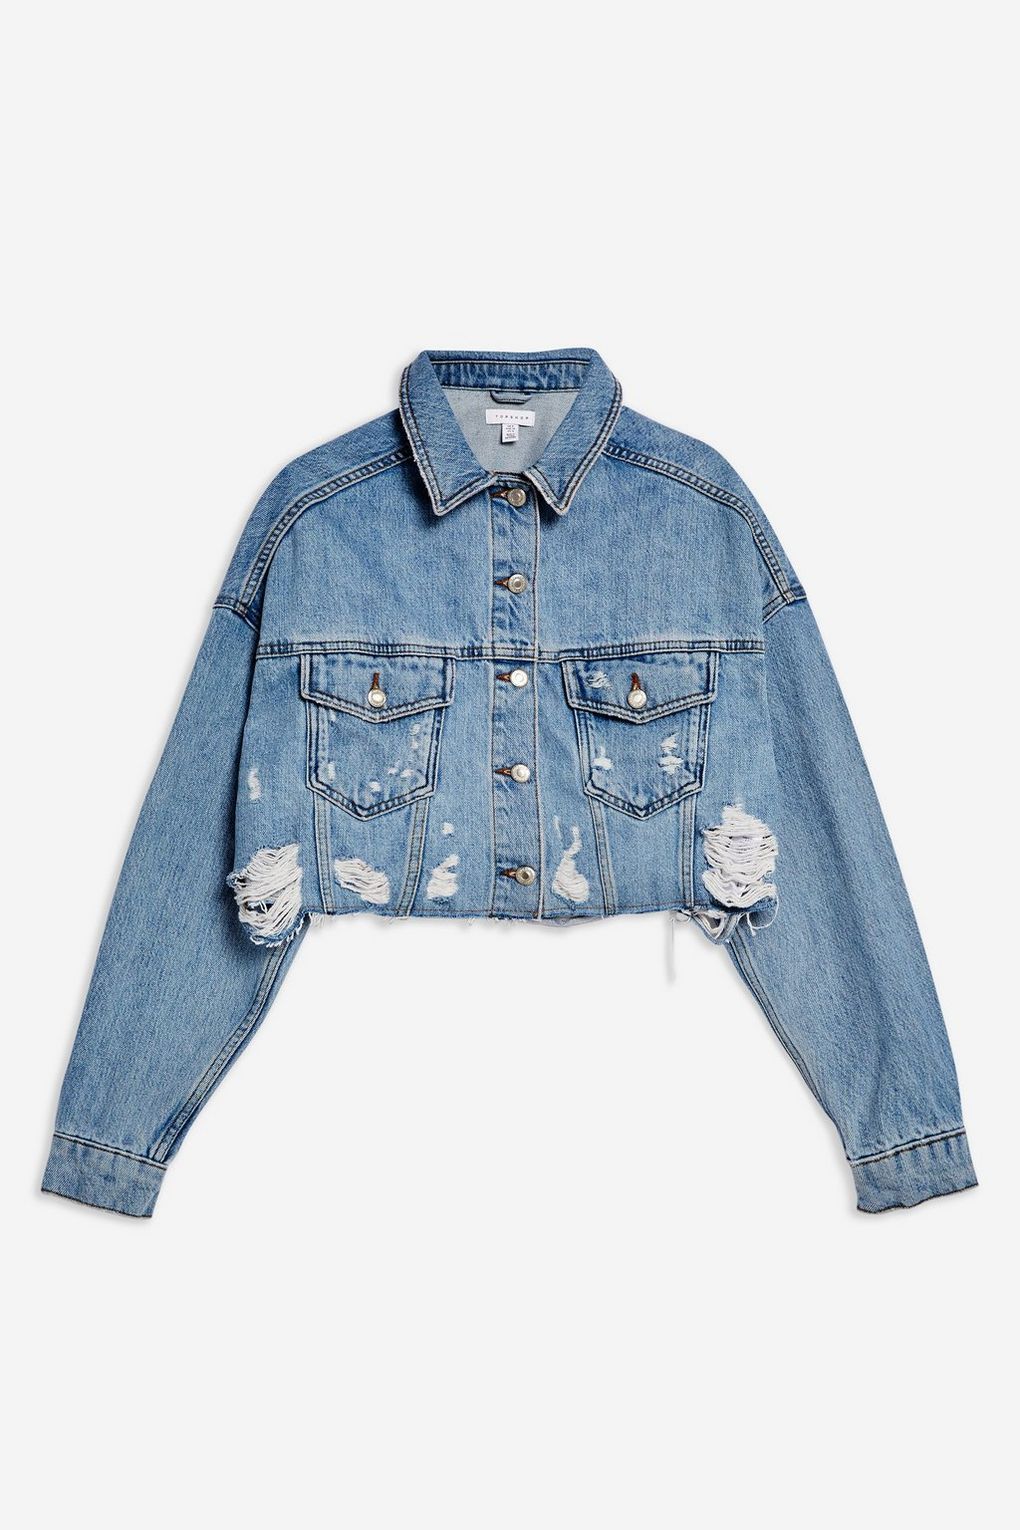 11 Cropped Denim Jackets That Are Straight From the '90s | Who What Wear